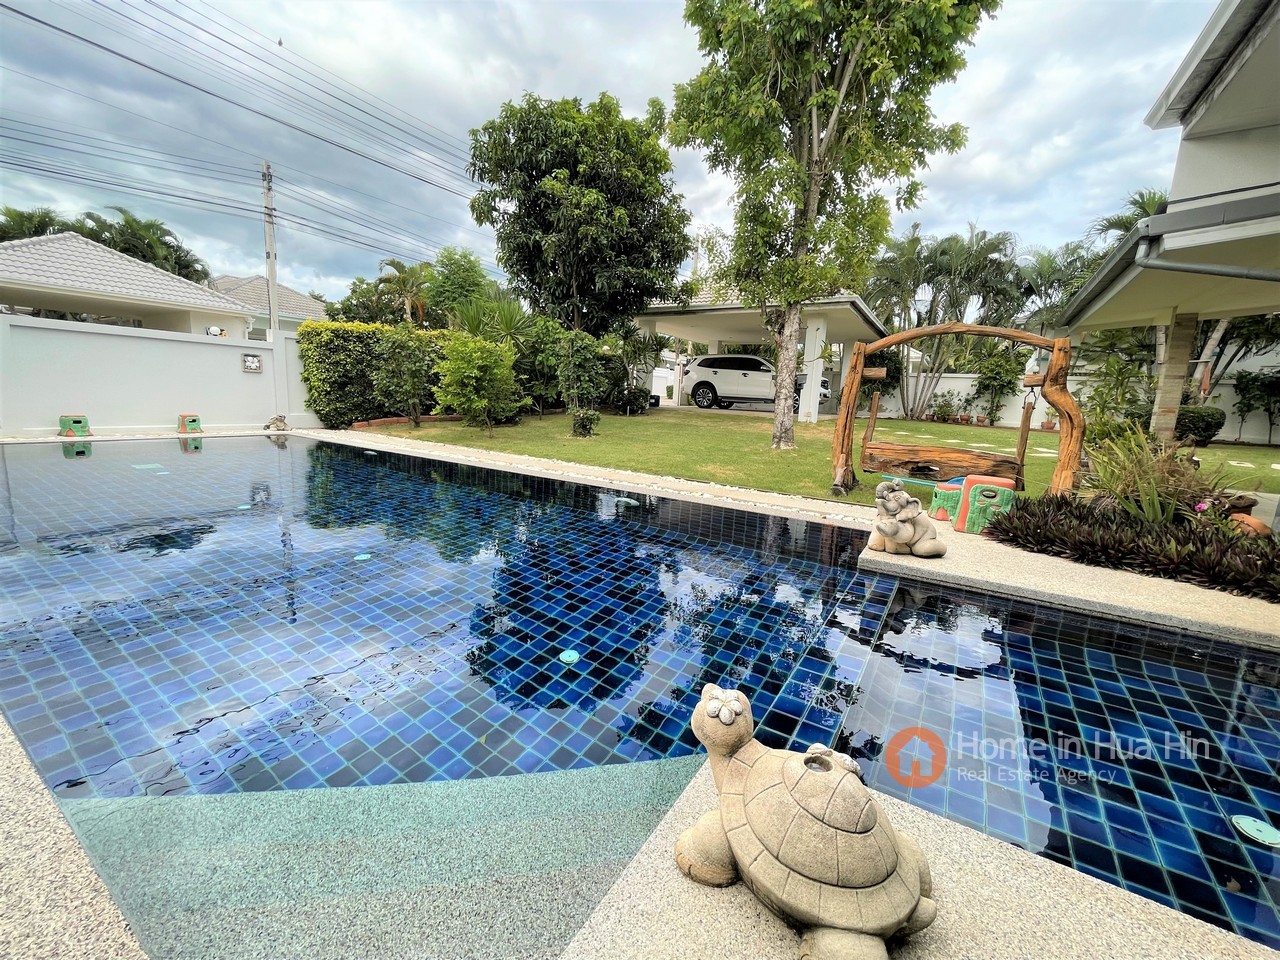 4 Bedroom House for Sale in Hua Hin with Private Pool Soi 88